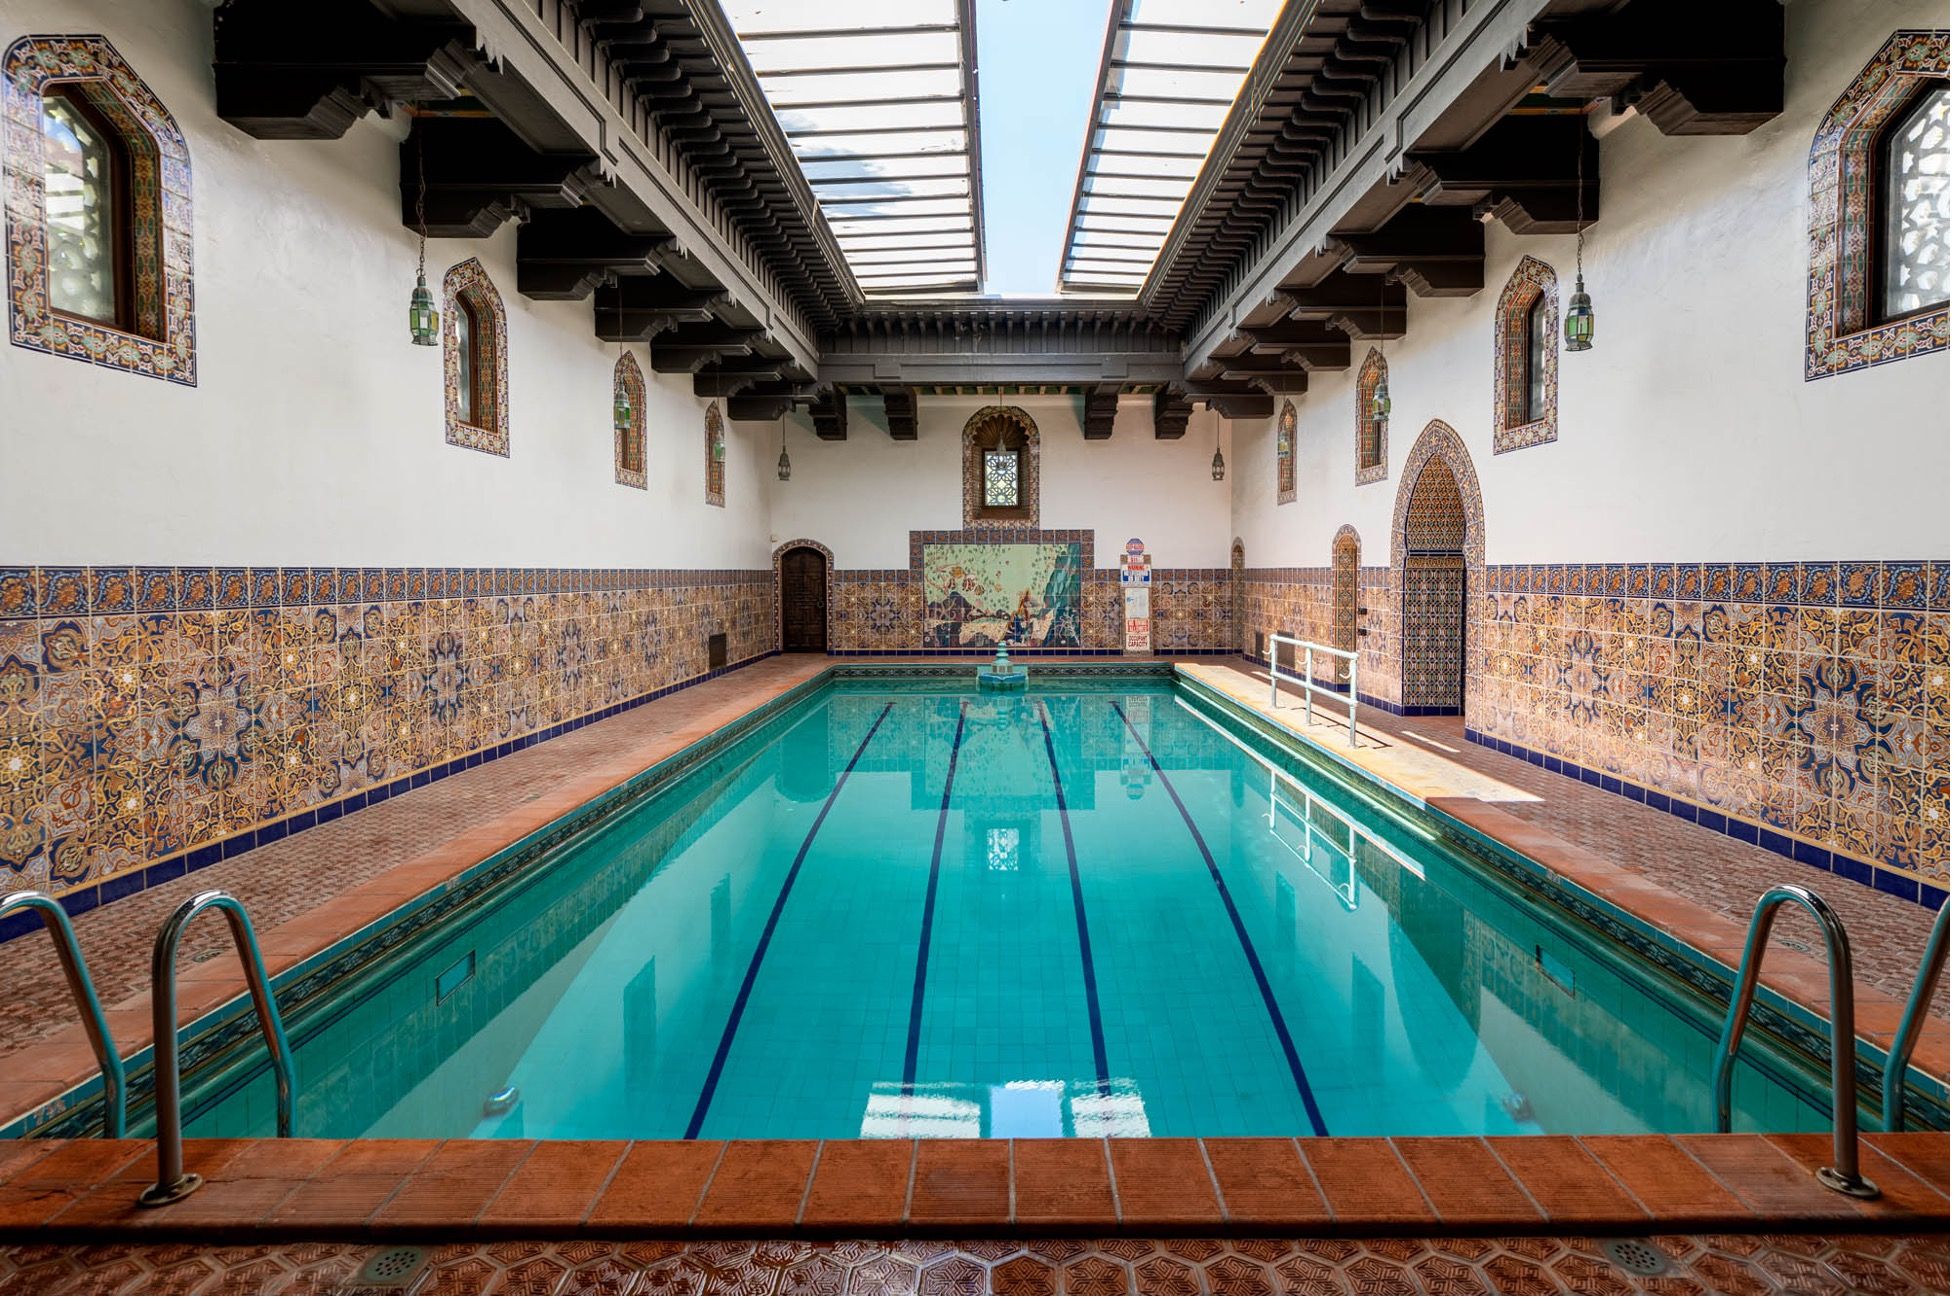 The historic 1920s era Natatorium  or indoor swimming pool with a large skylight in the Casa Blanca enclave